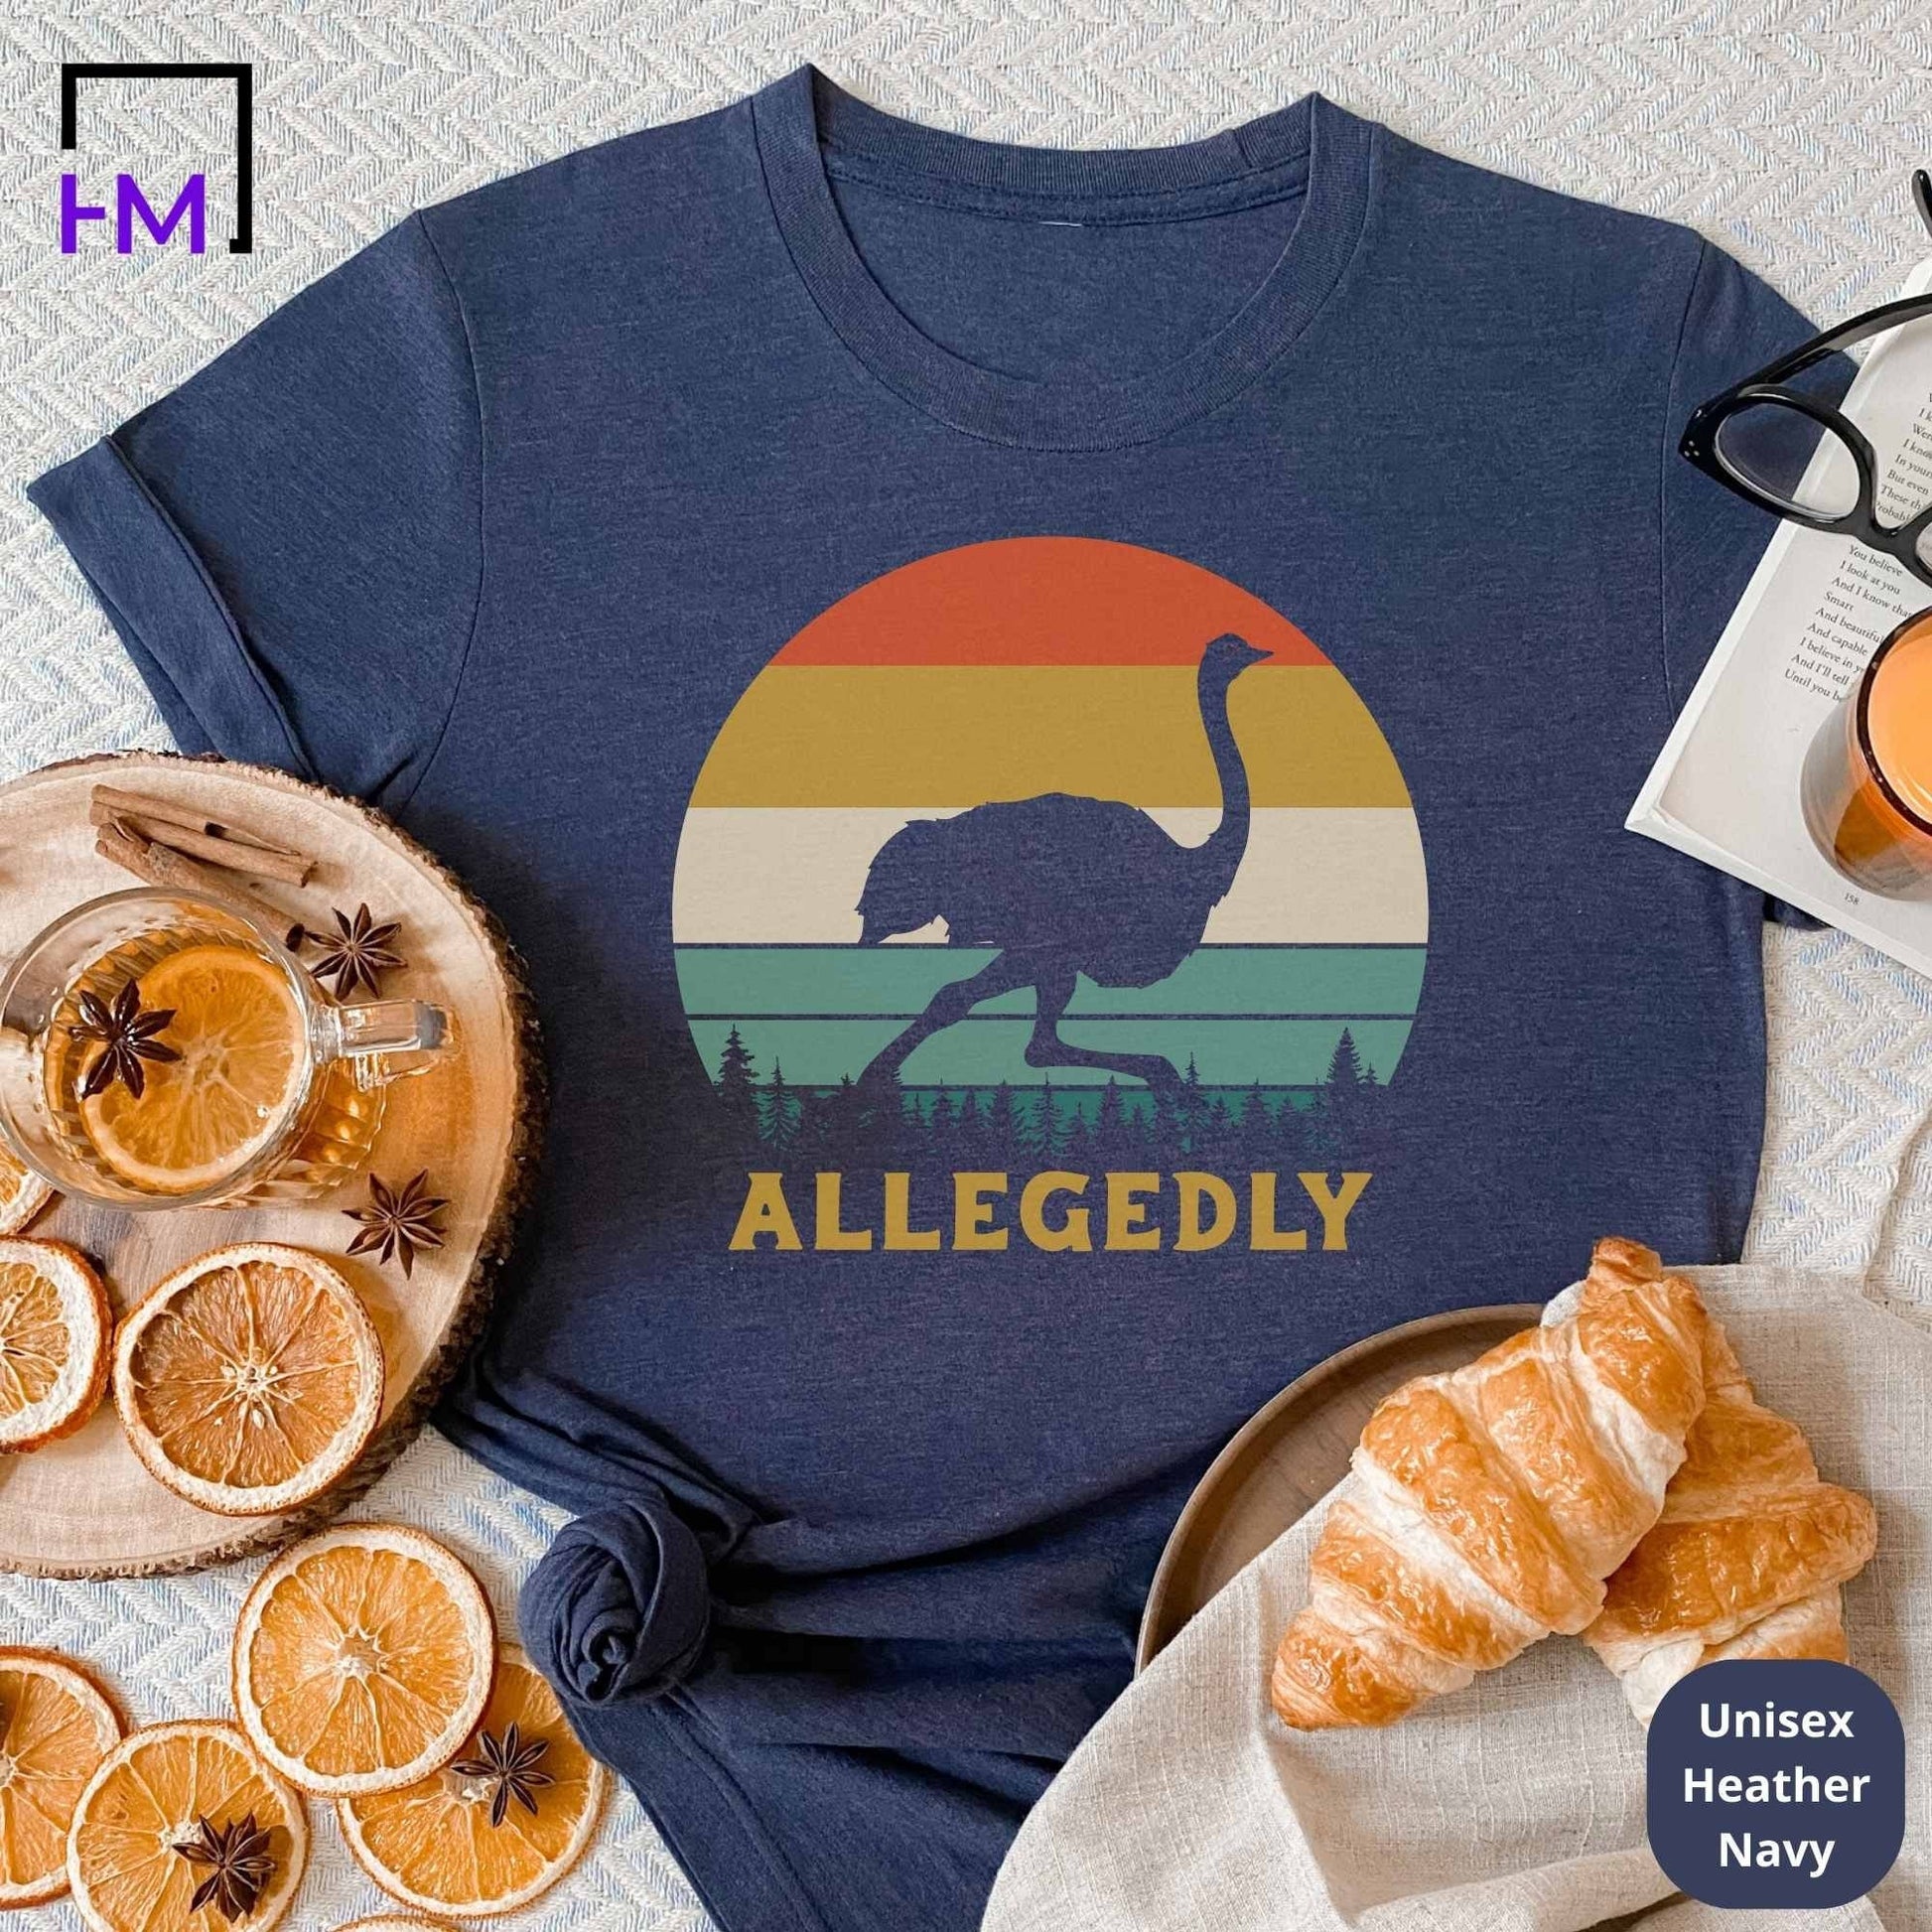 Allagedly Shirt, Allegedly Ostrich, Allegedly Black T-Shirt, Valentines Day Shirt, Gift for Valentines, Gift For Husband, Fathers Day Gift T HMDesignStudioUS